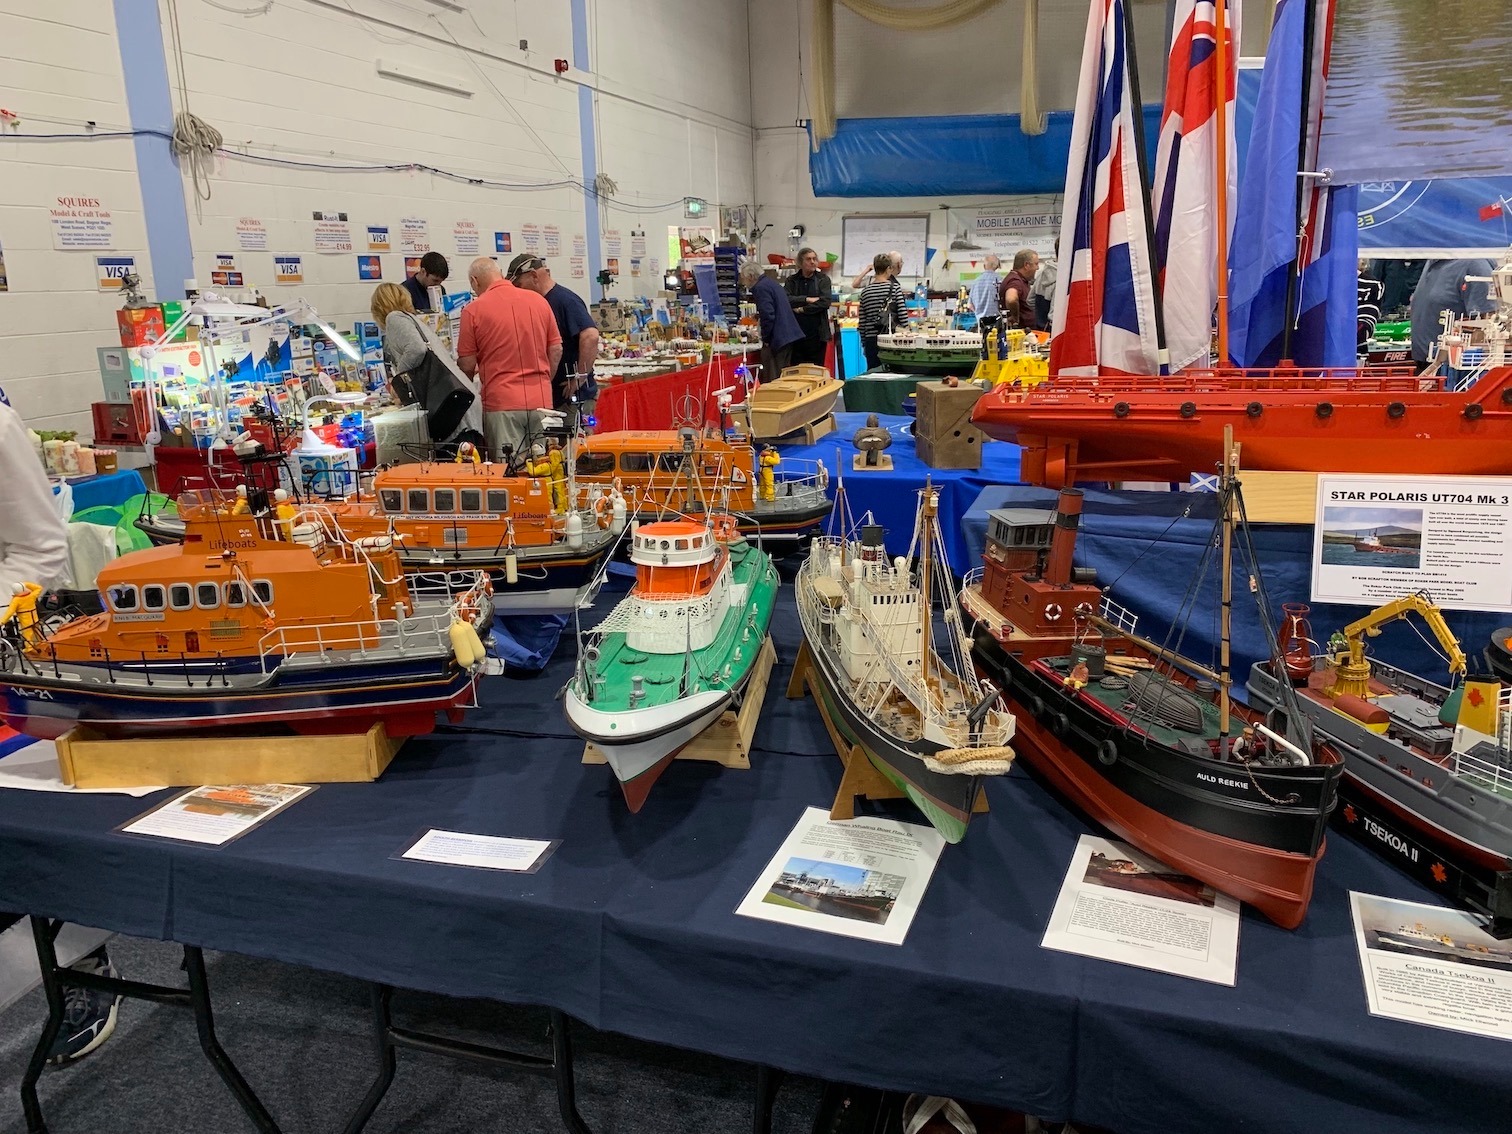 Left side of display showing lifeboats